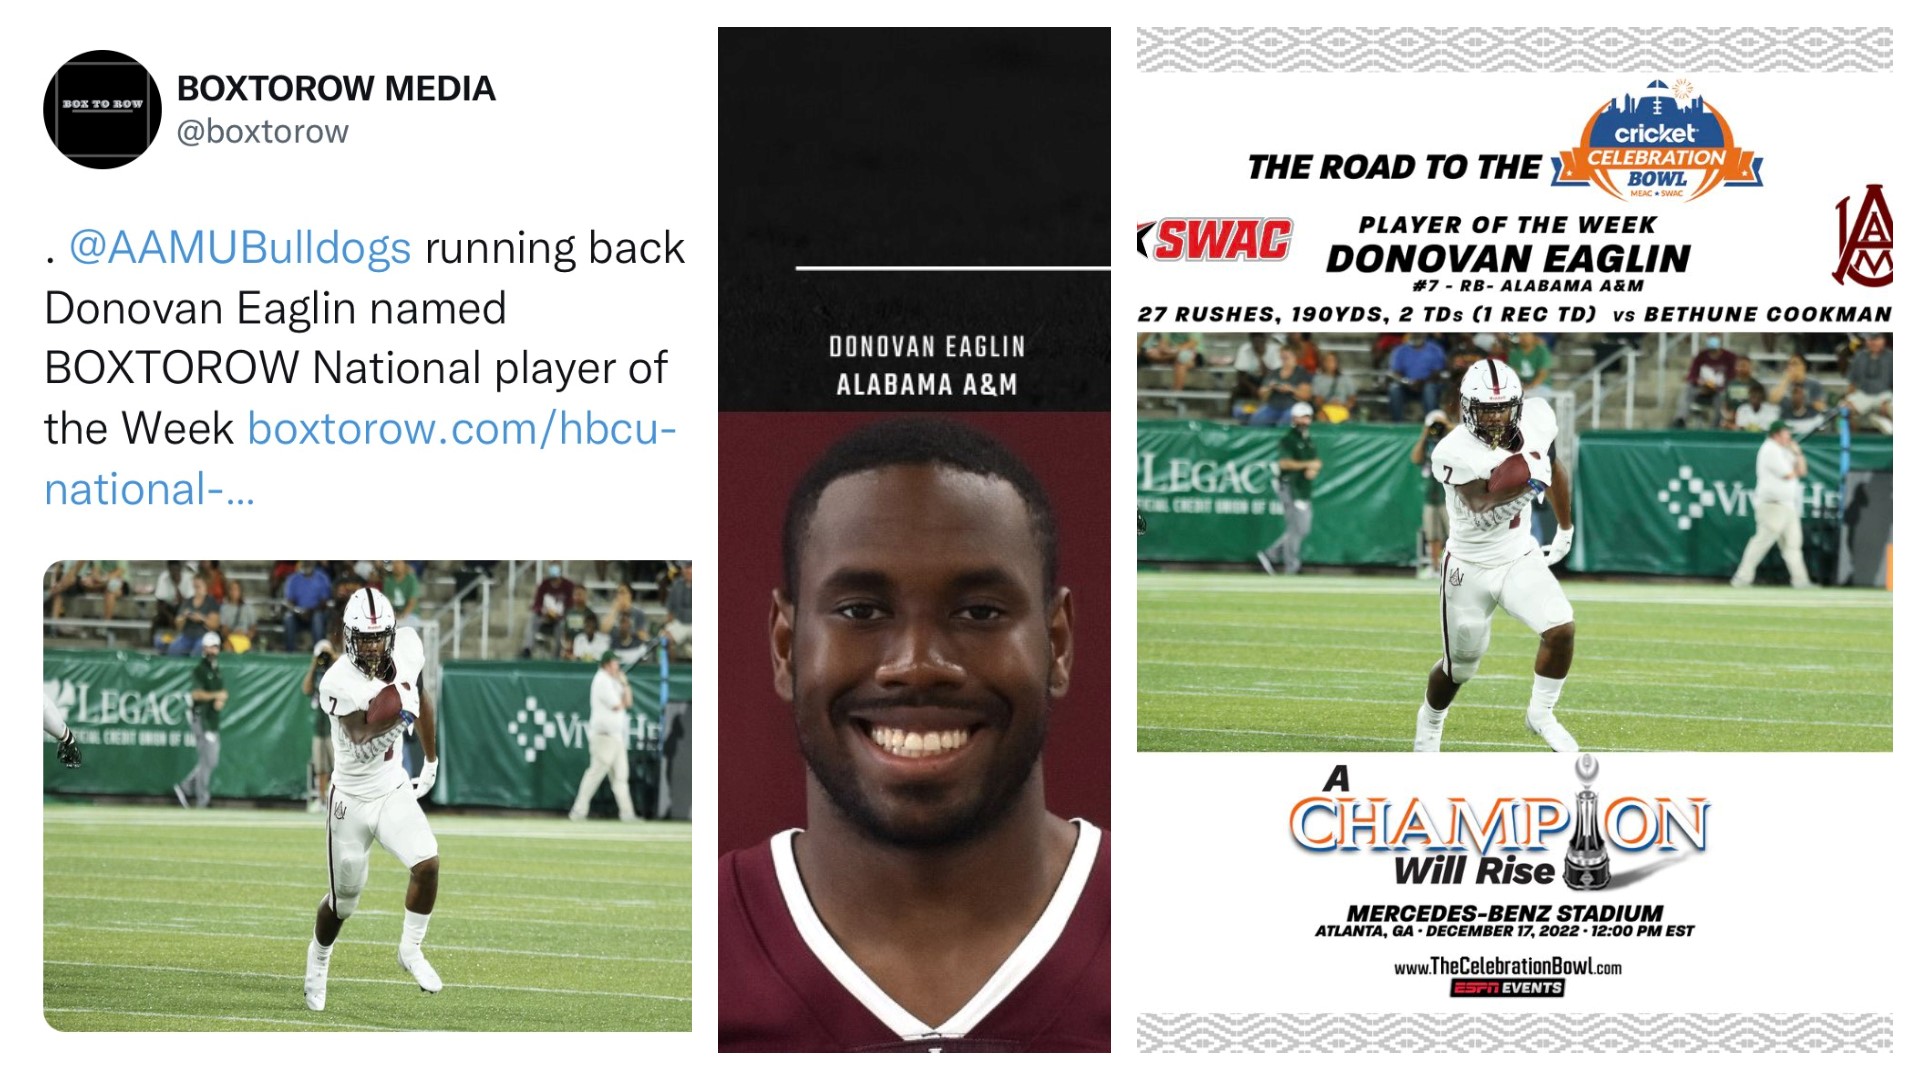 Alabama A&M running back Donovan Eaglin earned Player of the Week nods from the SWAC, BoxToRow & the Celebration Bowl after rushing for 190 yards and scoring 3 TDs